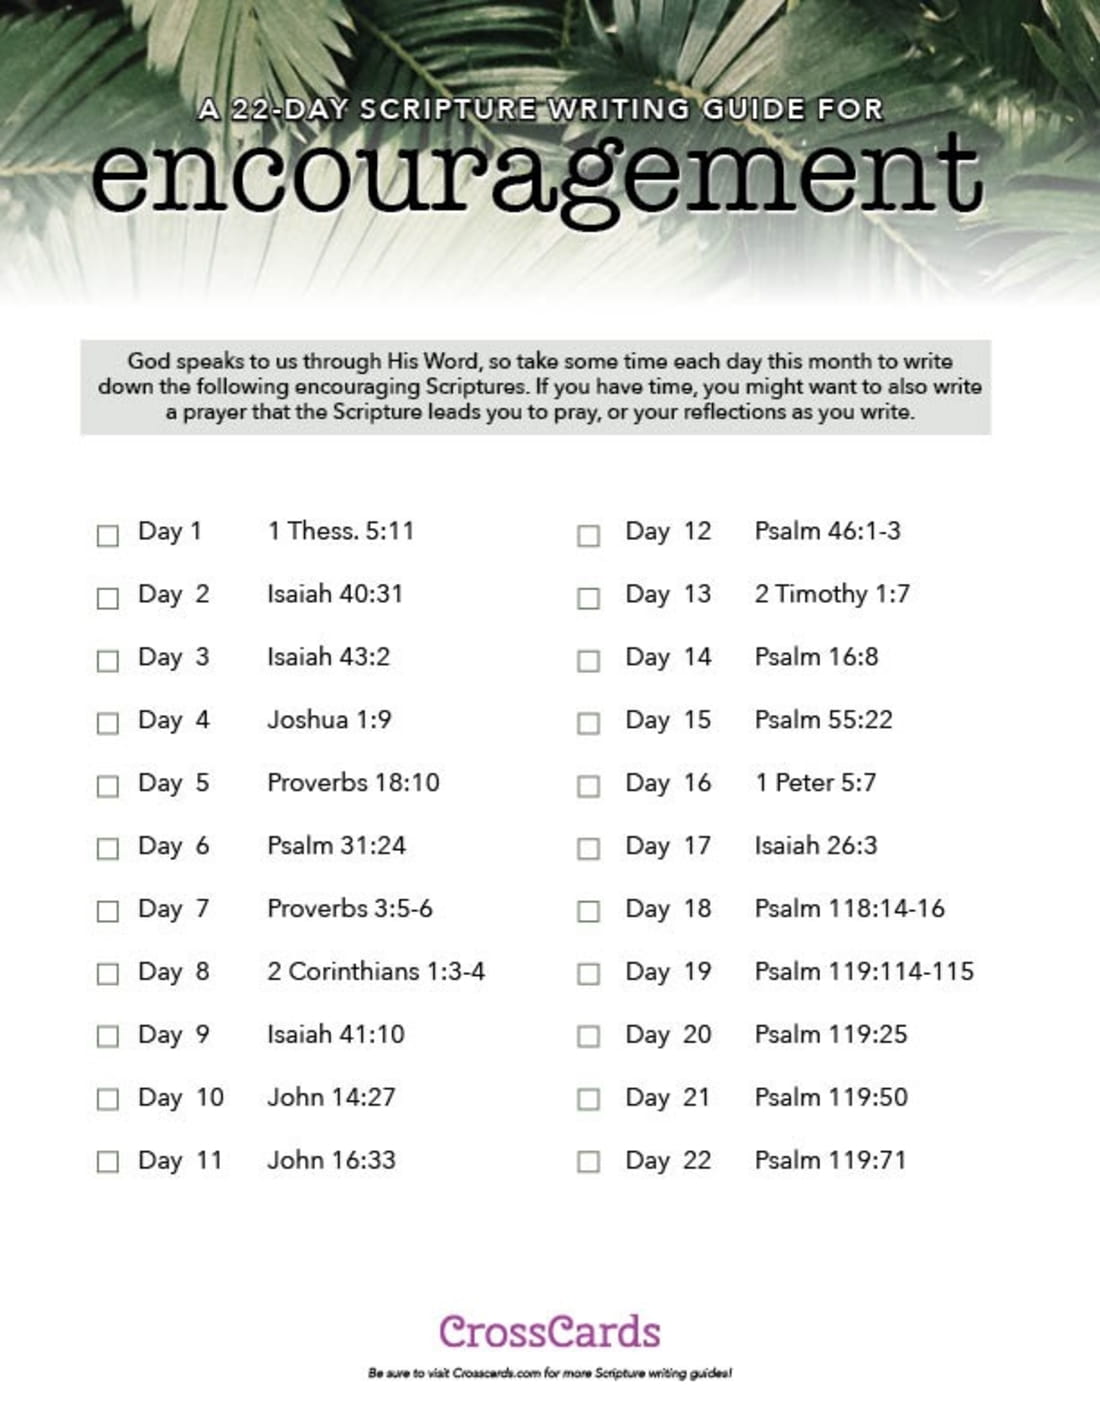 A 22-Day Scripture Writing Guide for Encouragement